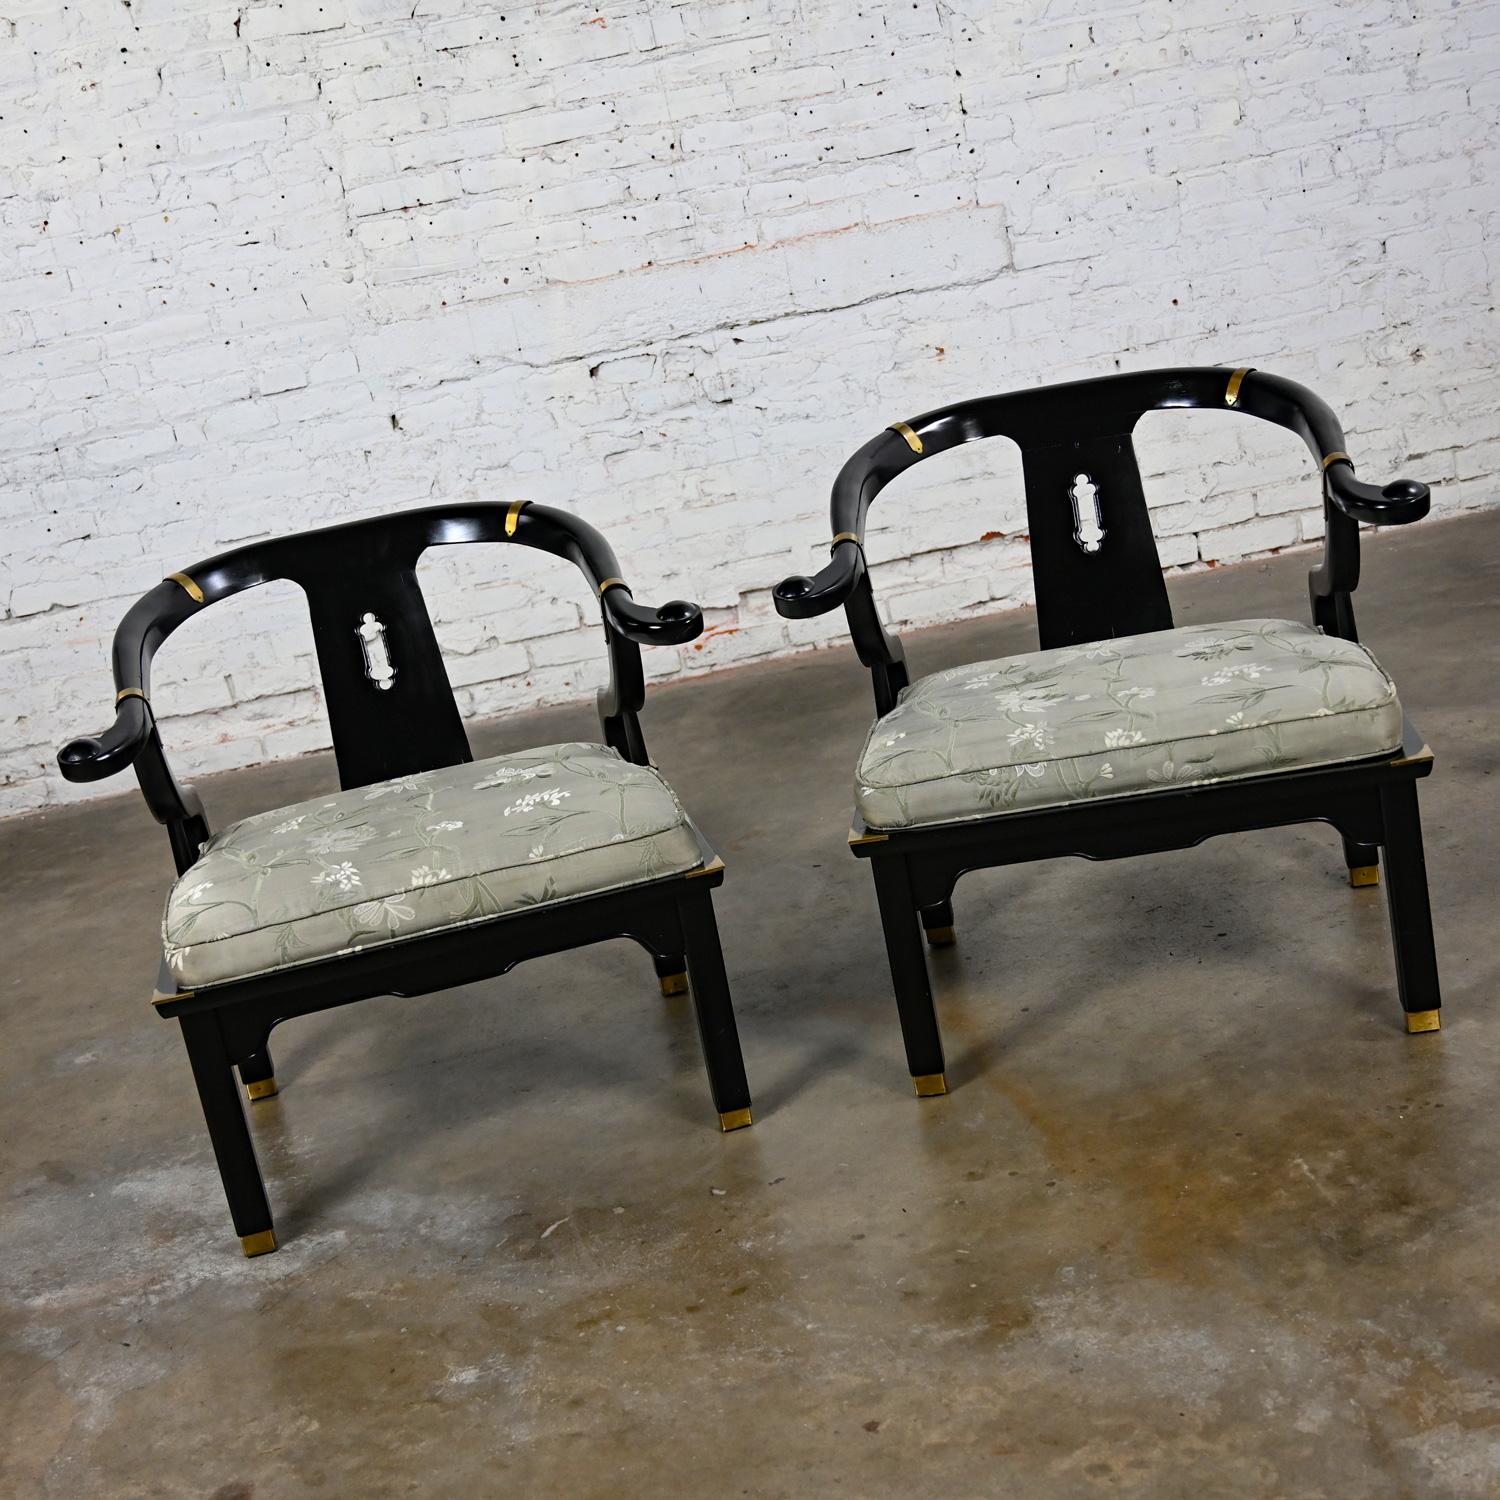 Wonderful vintage Asian Chinoiserie Ming style yoke back chairs with black lacquered frames & brass details in the style of James Mont. Beautiful condition, keeping in mind that these are vintage and not new so will have signs of use and wear. They